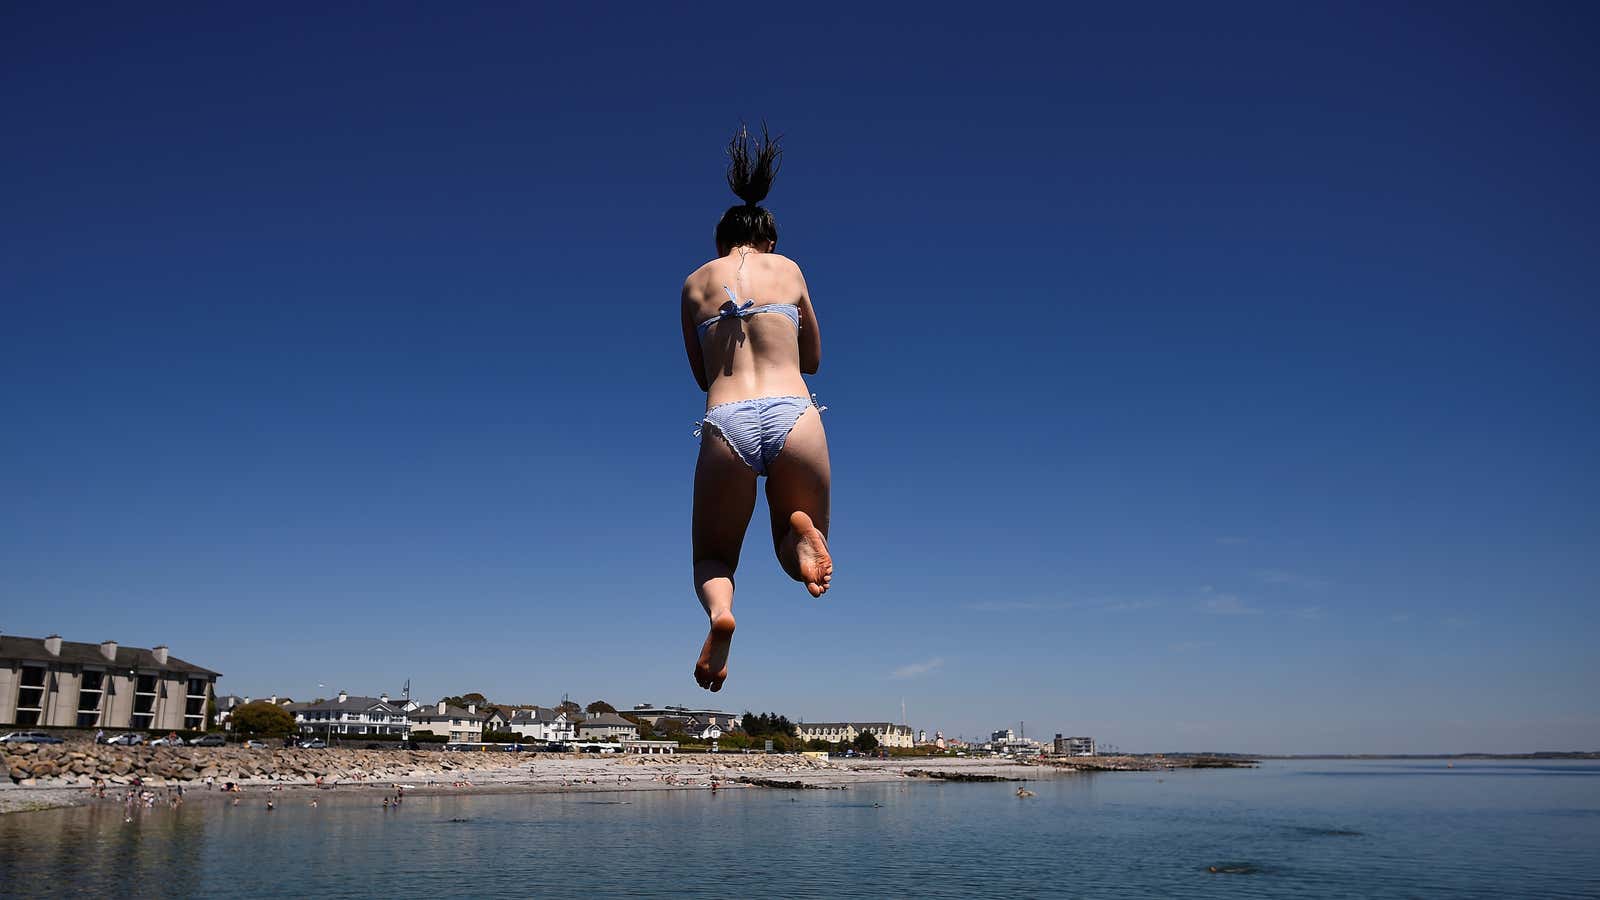 A woman jumps from a diving board into the sea on Salthill beach during sunny weather in Galway, Ireland June 26, 2018.